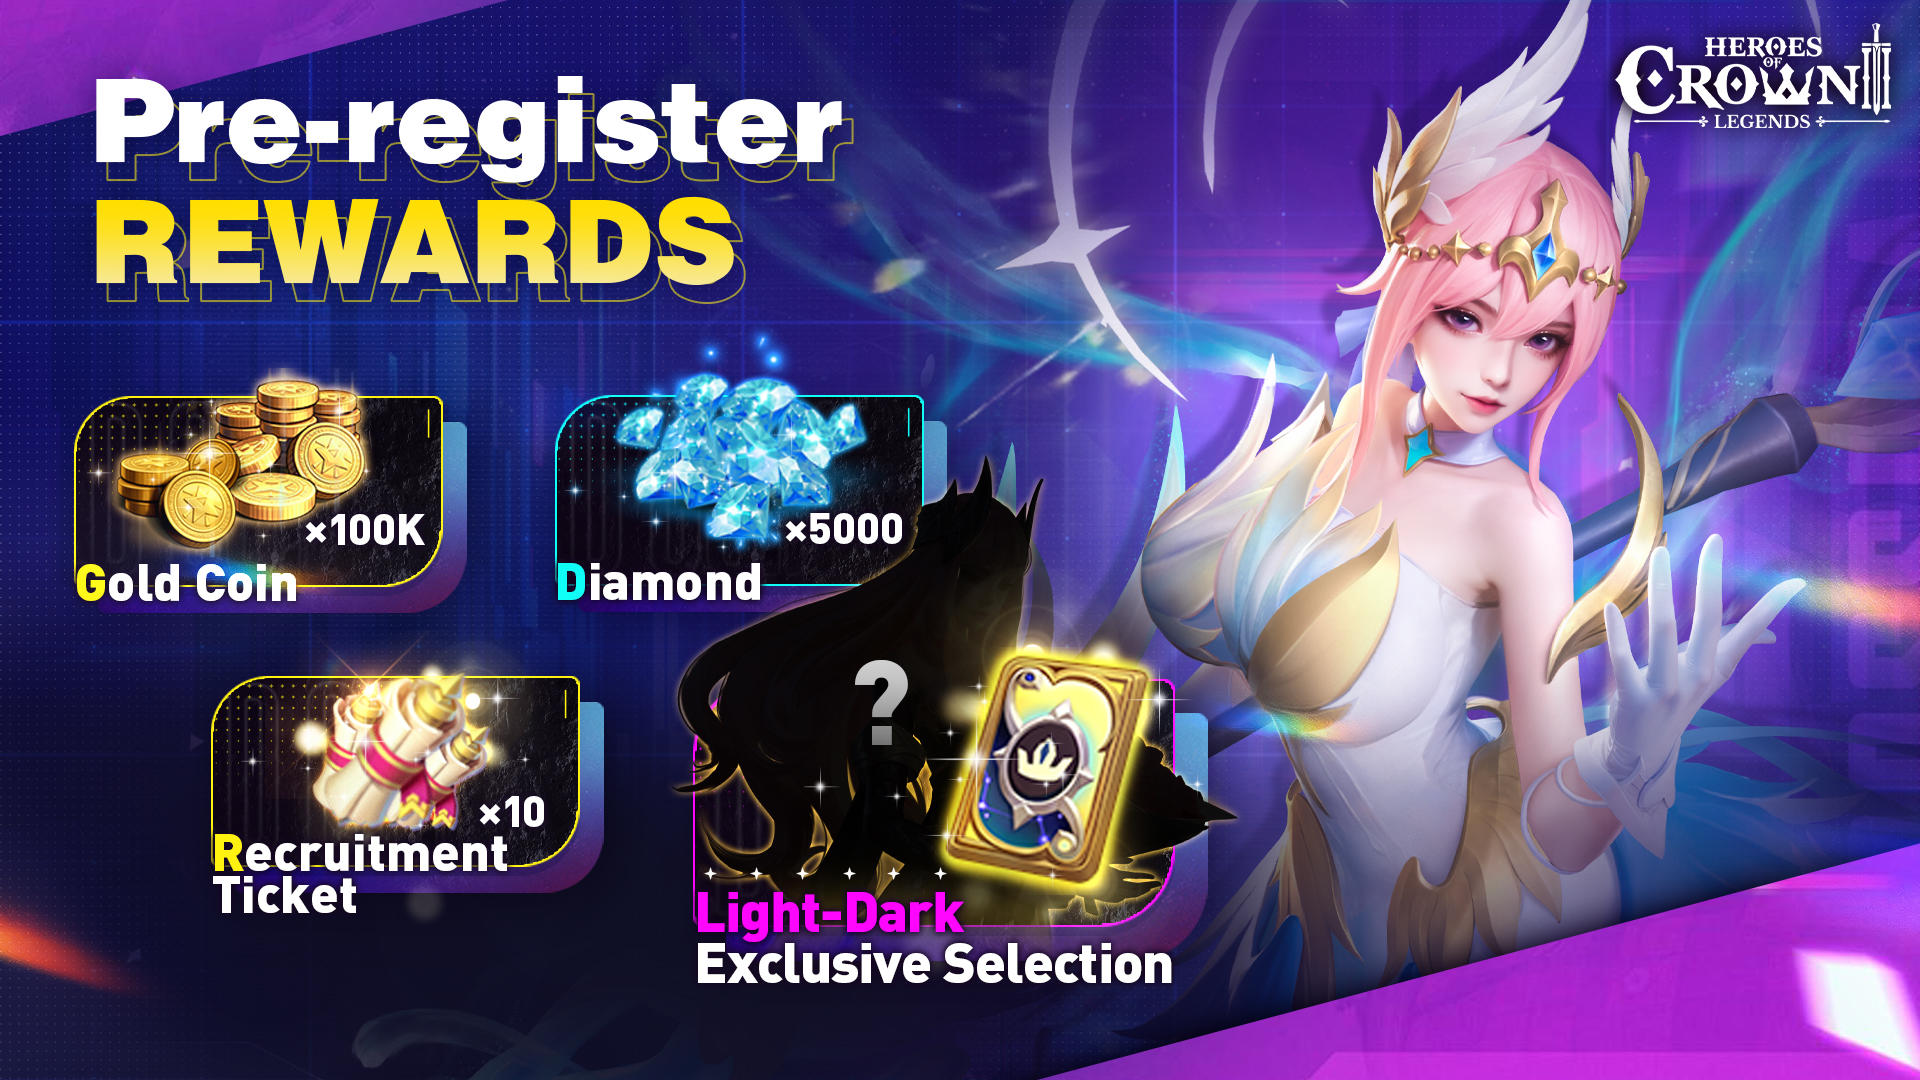 Still worried about materials? Pre-register now for massive Rewards